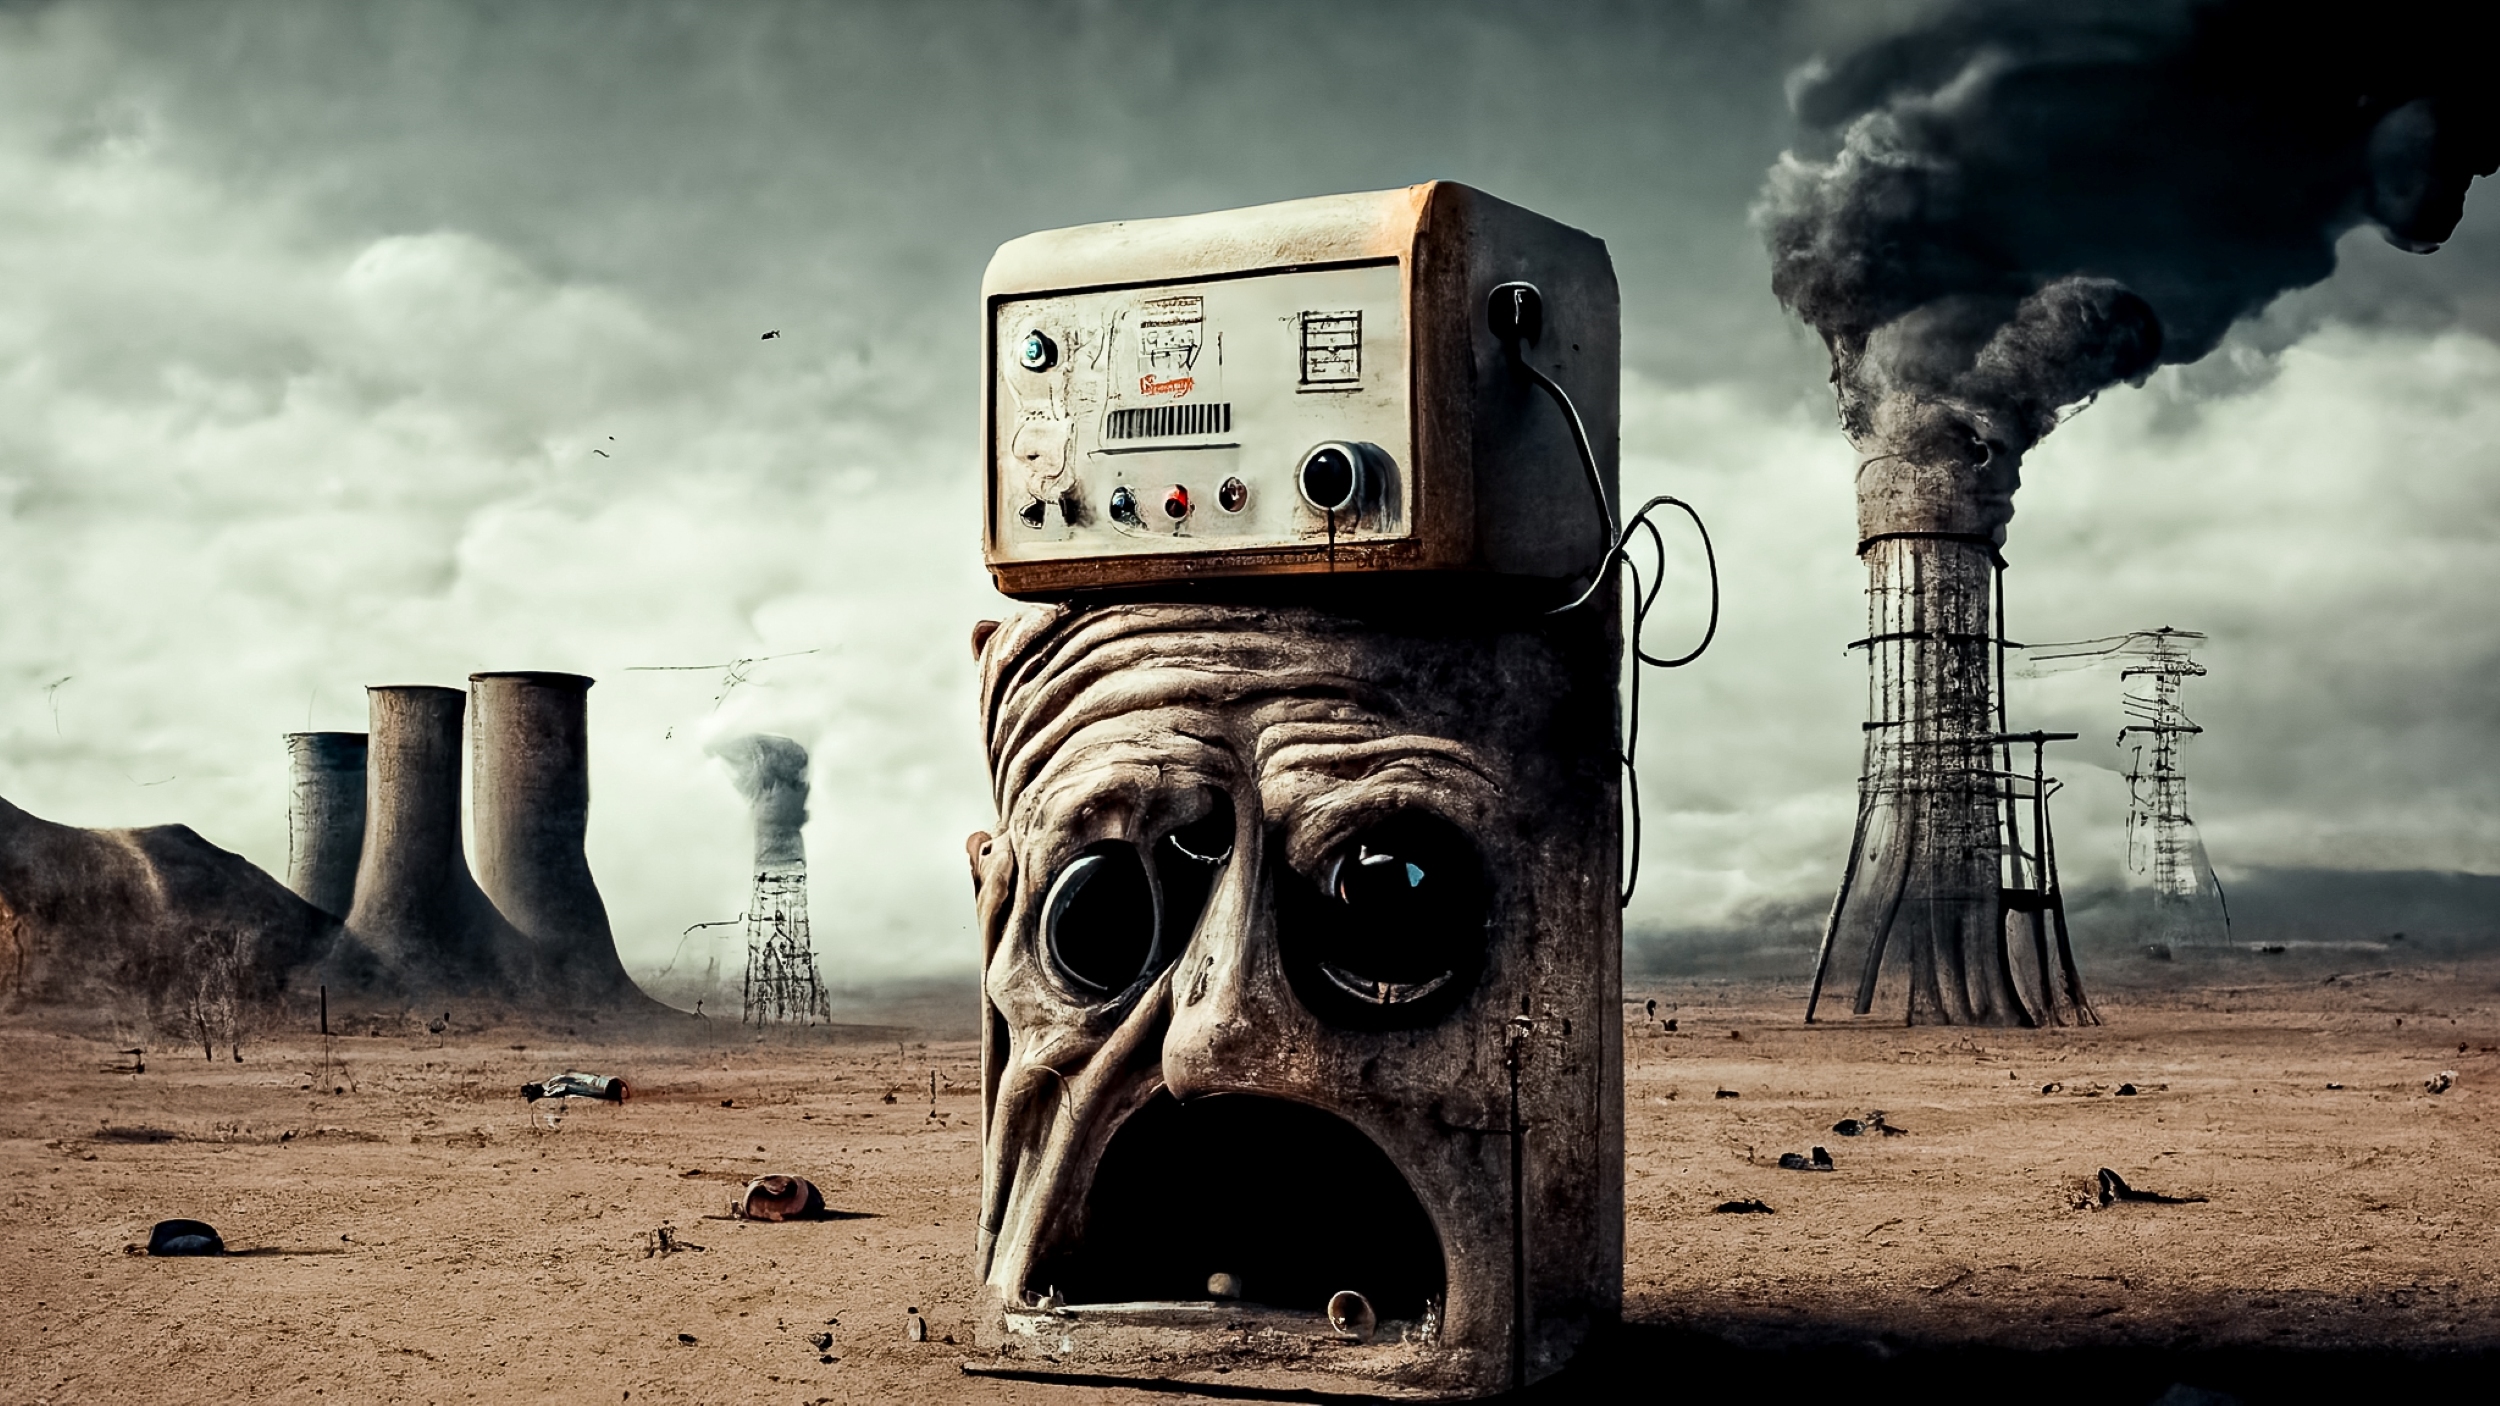 Artificial Intelligence digital artwork by Julian Giacomelli depicting an Energy crisis in a surrealist style.